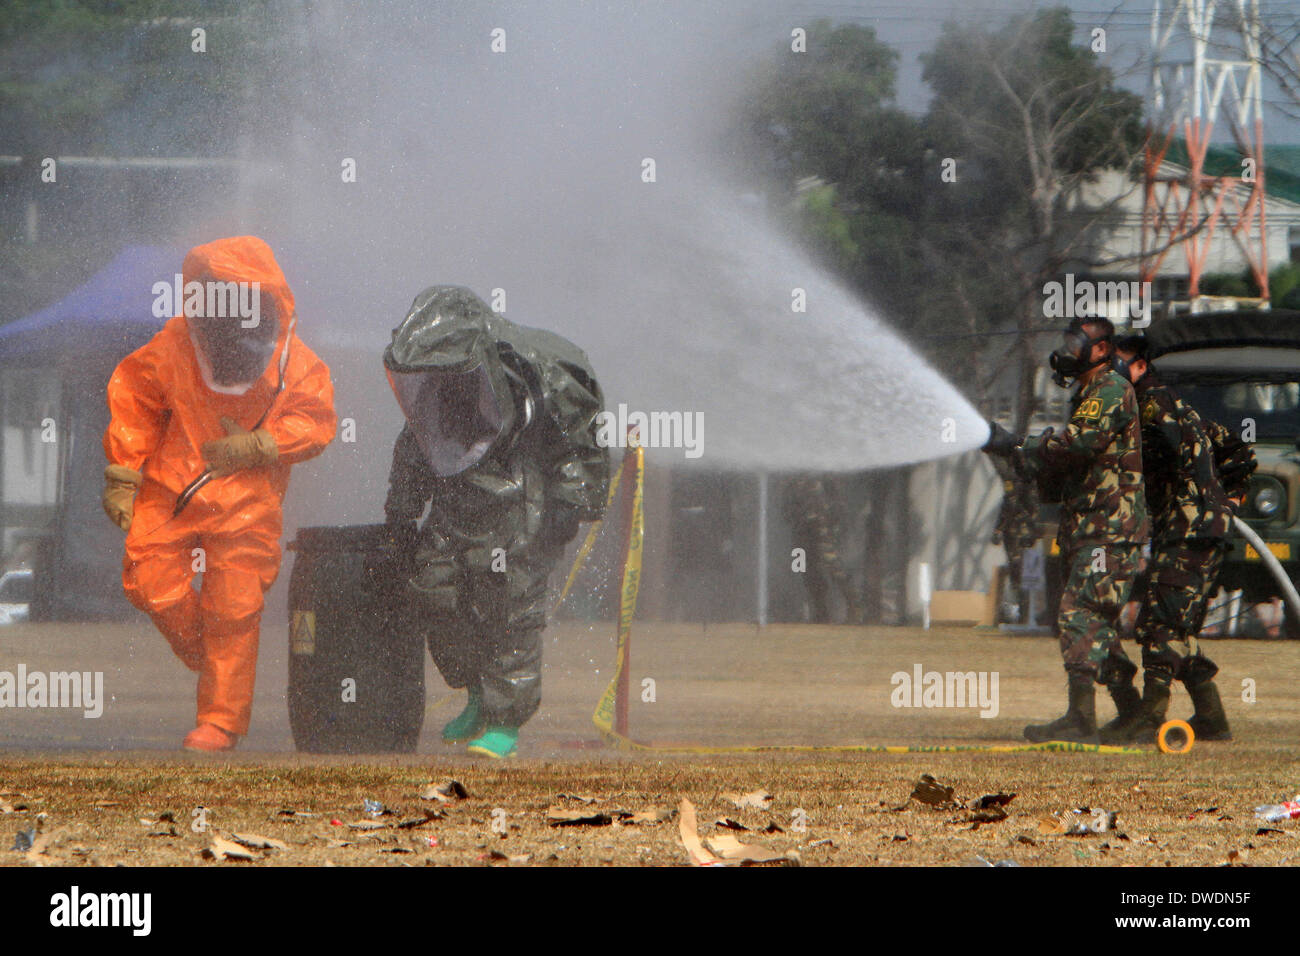 Quezon City, Philippines. 6th Mar, 2014. Soldiers from the Philippine Army participate in the Chemical, Biological, Radiological, and Nuclear Explosive (CBRNE) capability demonstration at Camp Aguinaldo in Quezon City, the Philippines, March 6, 2014. Credit:  Rouelle Umali/Xinhua/Alamy Live News Stock Photo